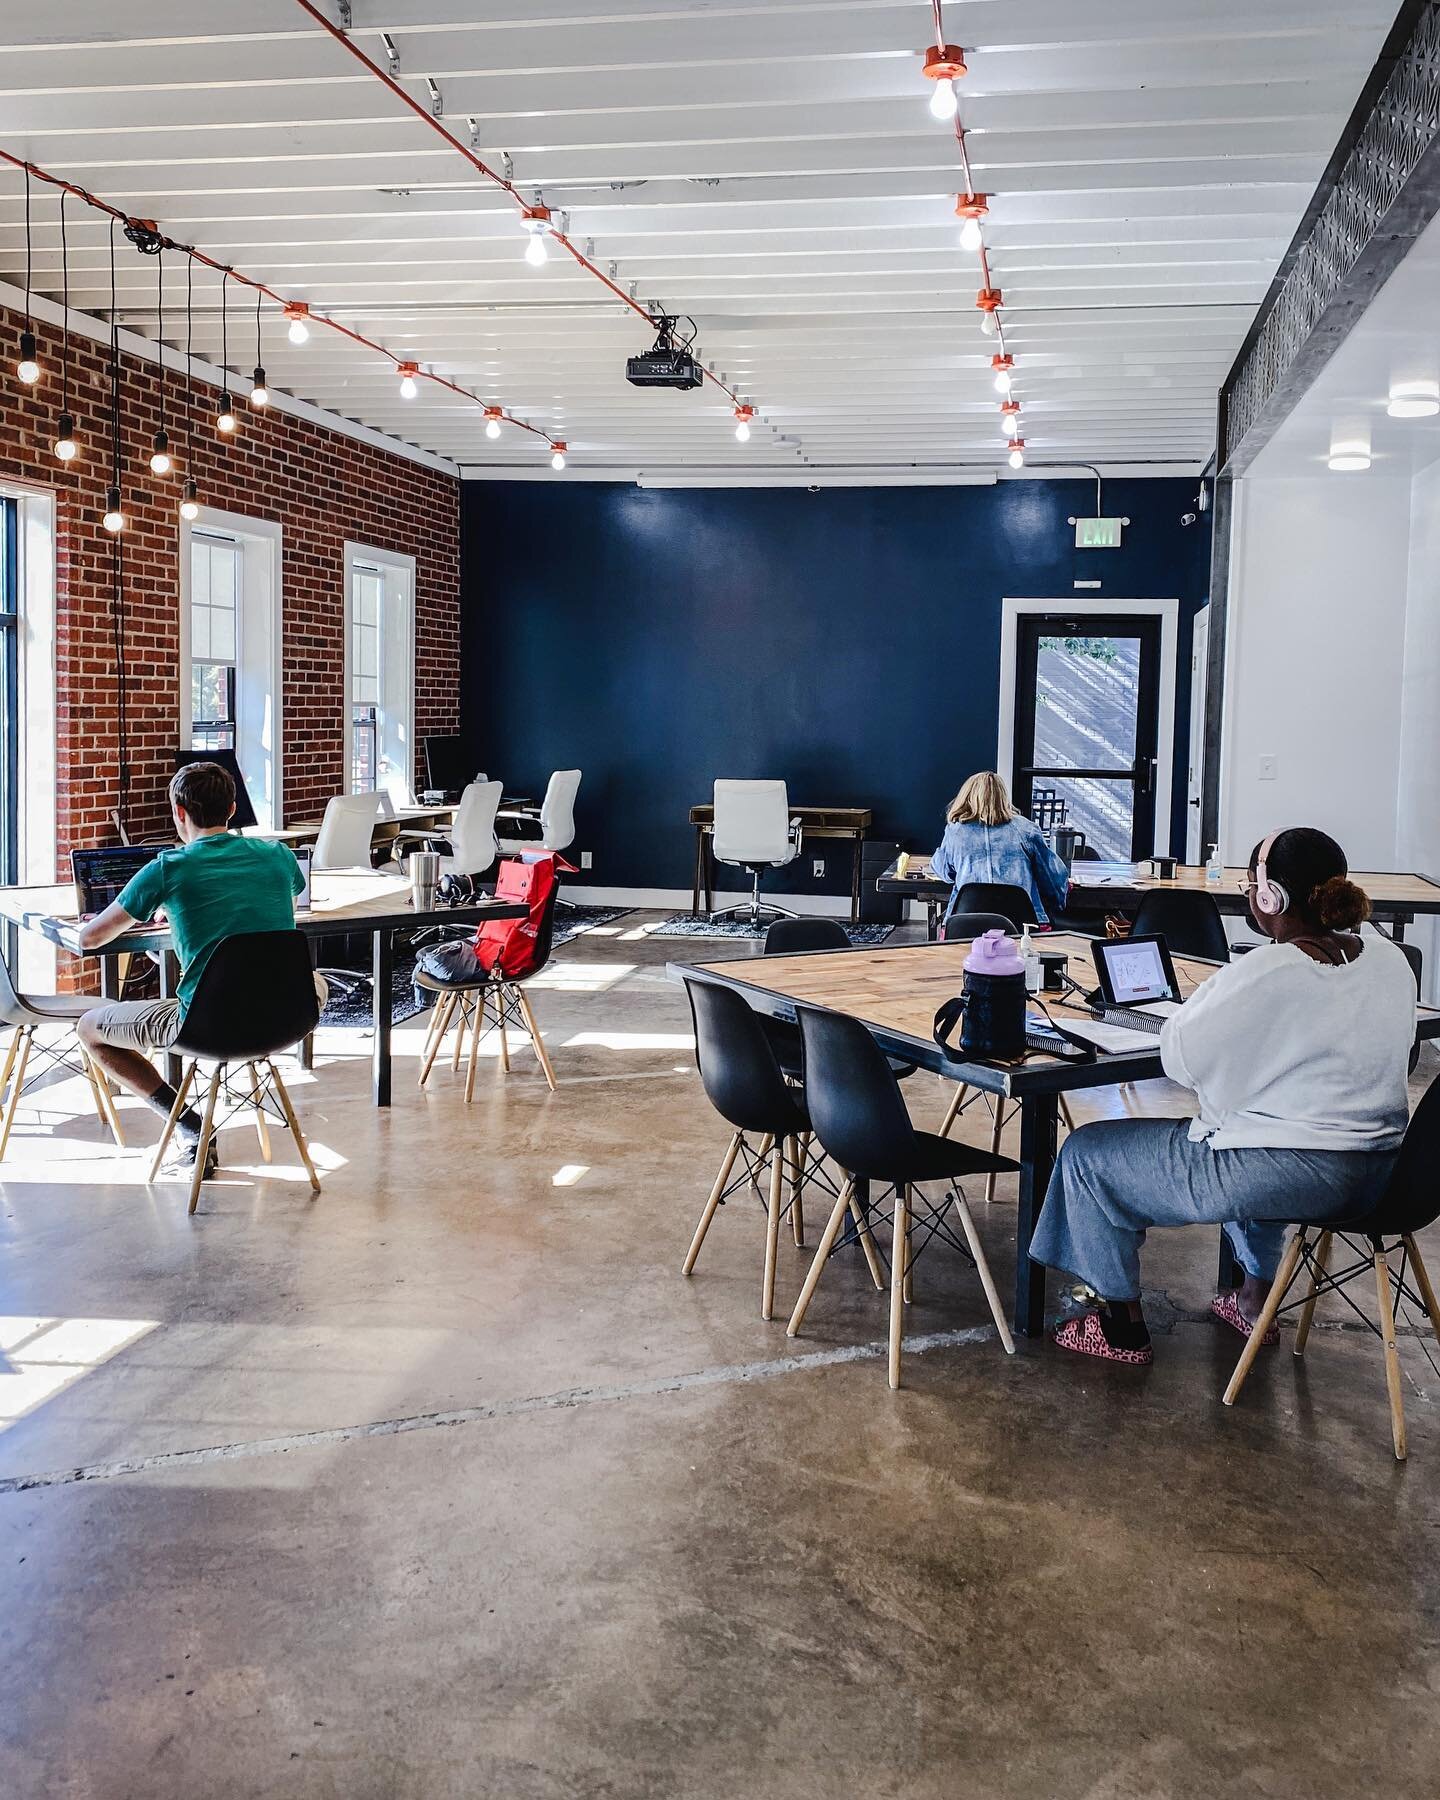 Beautiful, light-filled workspace for maximum productivity and inspiration? ✅ 
Visit us on a tour to learn more about how Hub membership can help you stay motivated and help you work smarter.